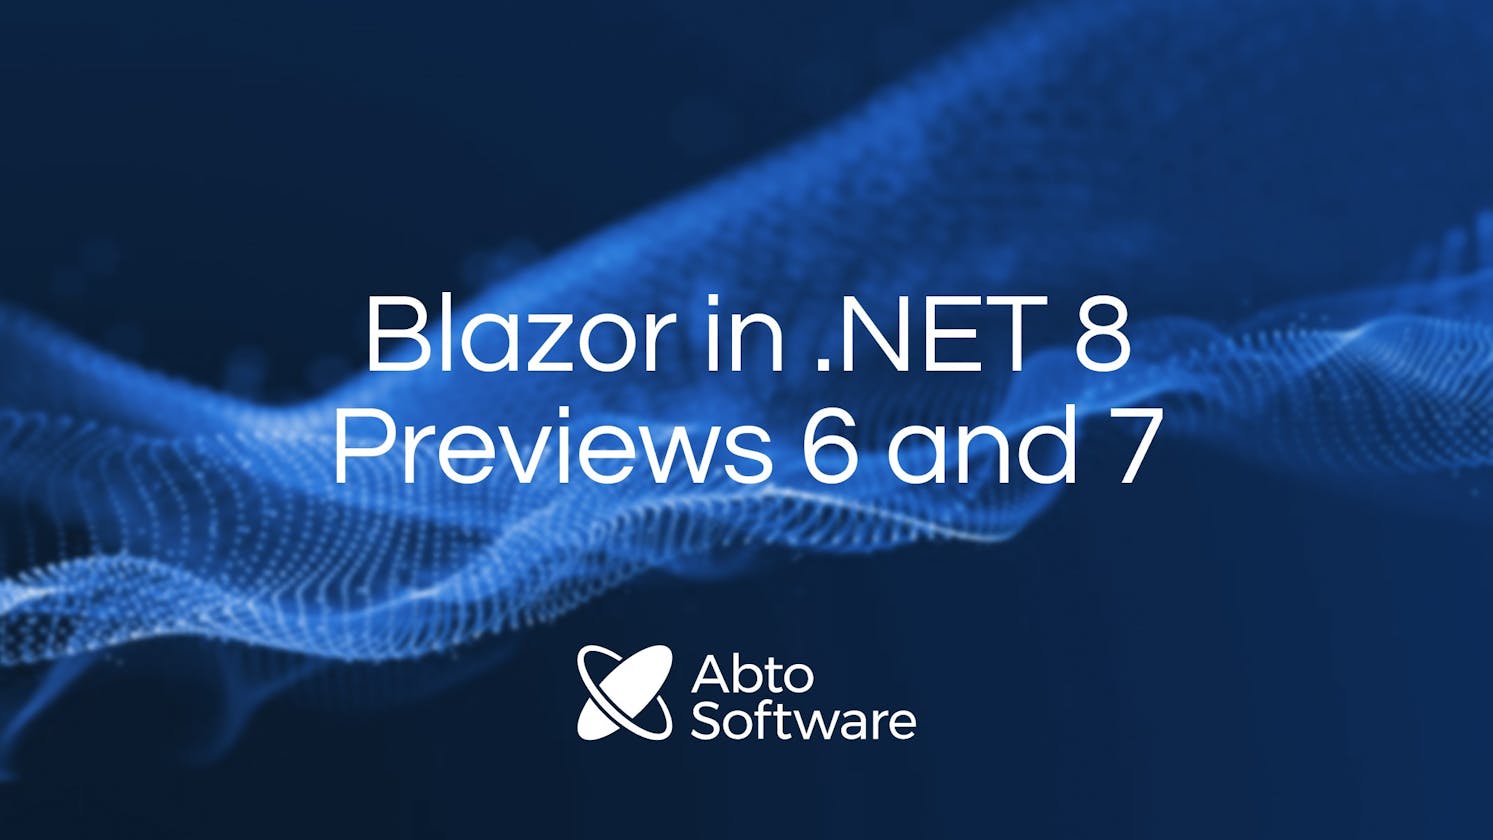 Blazor in .NET 8 Previews 6 and 7